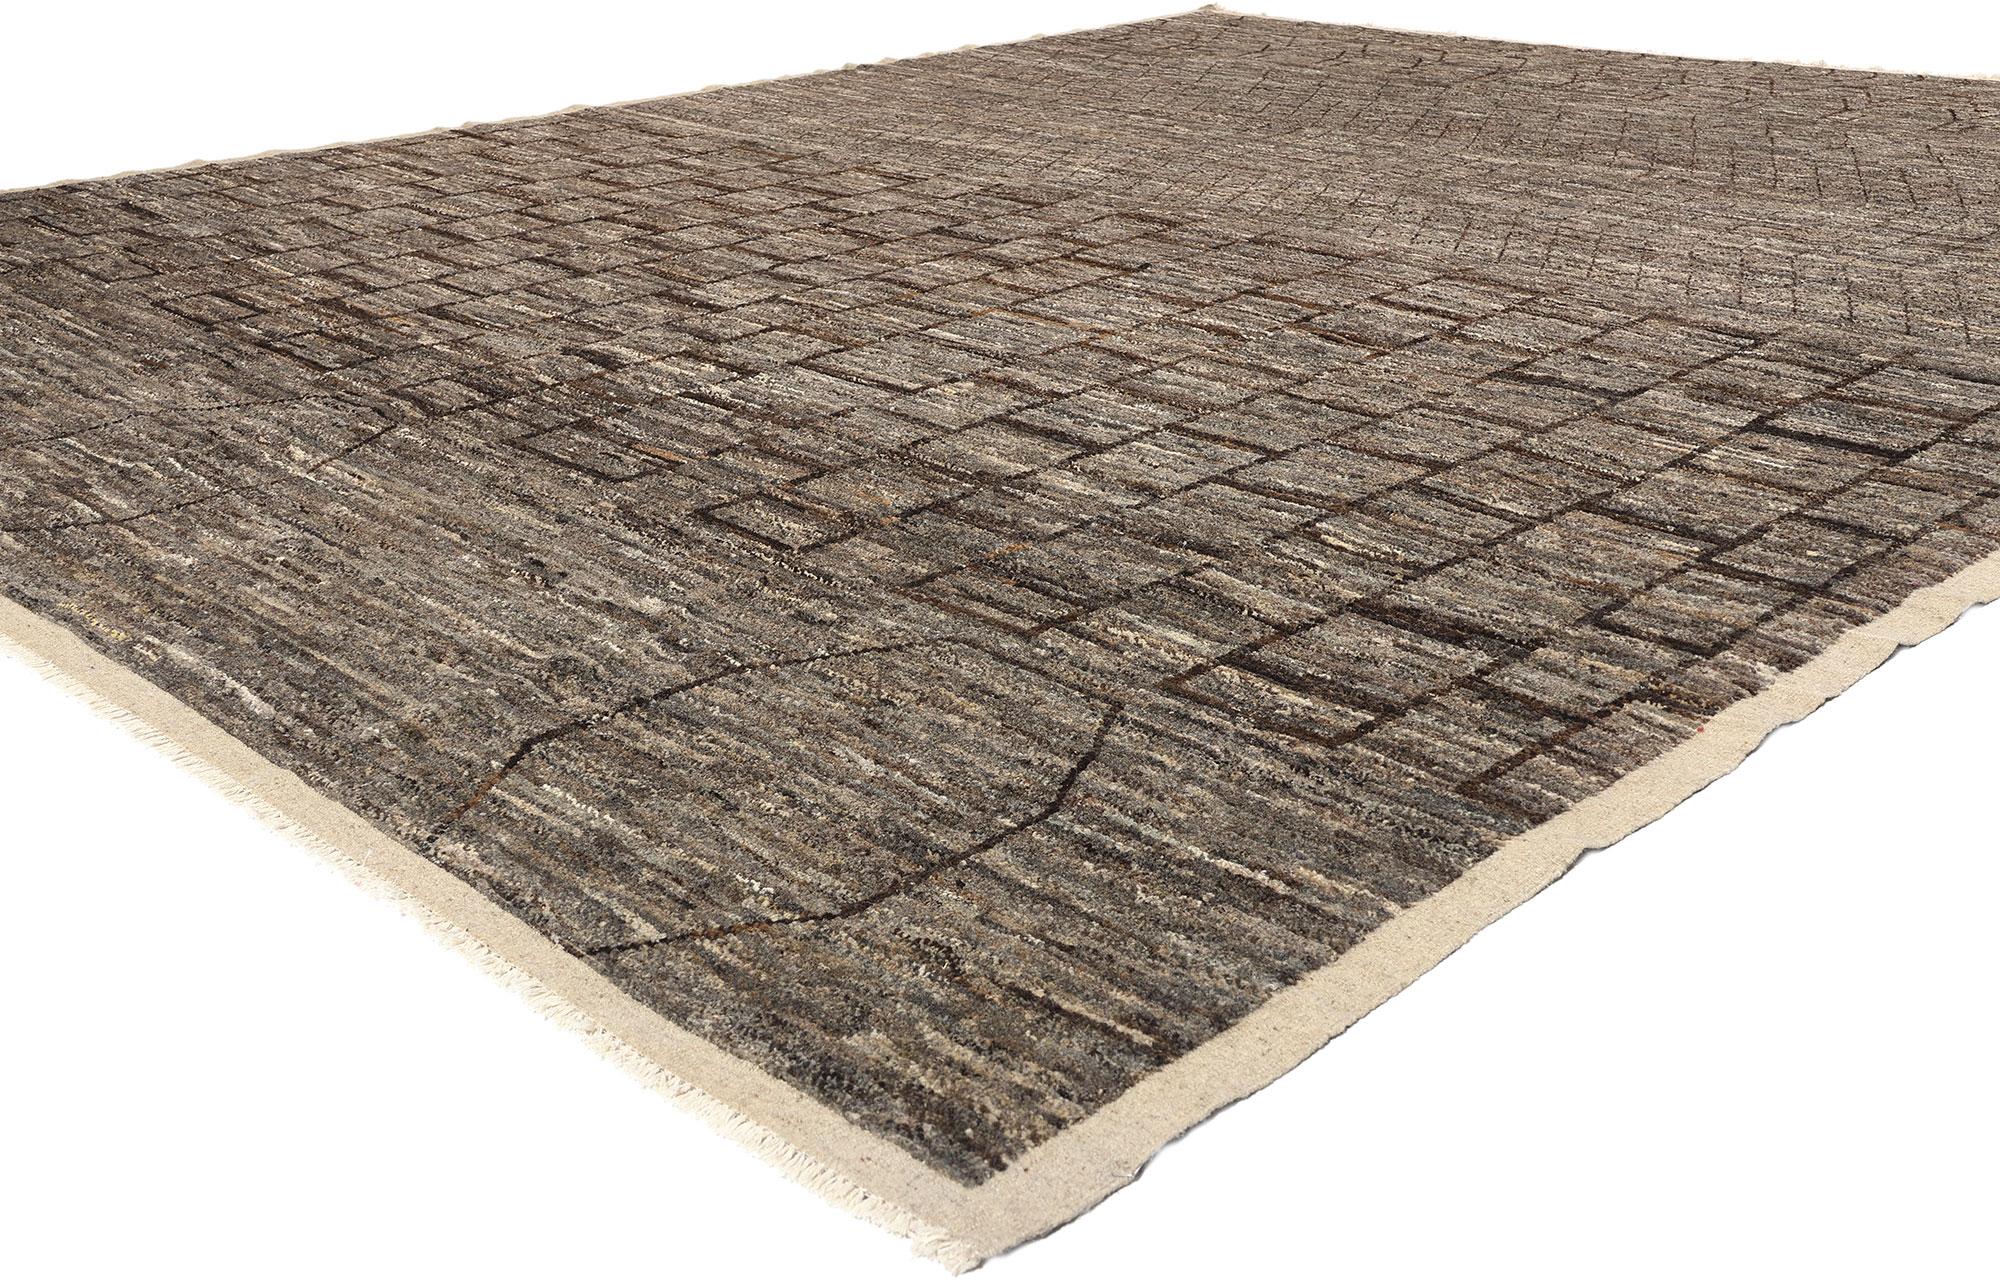 81116 Organic Modern Brutalist Moroccan Rug, 12'01 x 14'10. This hand-knotted wool Organic Modern Moroccan rug seamlessly combines the bold essence of Brutalism with tribal enchantment, all while embracing the principles of Biophilic Design. Crafted